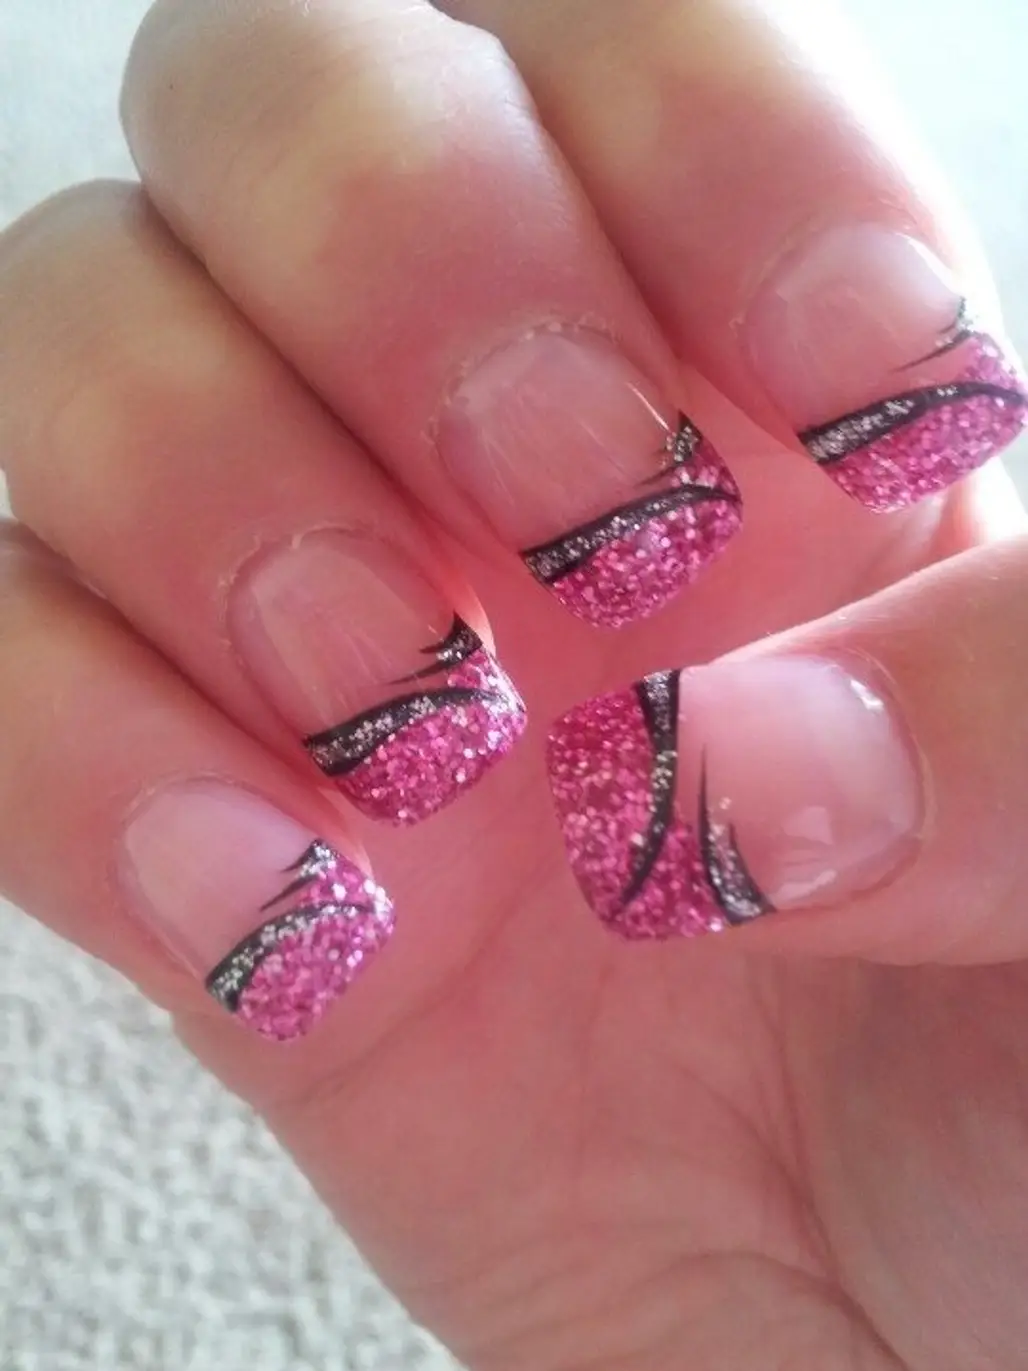 Nails design is in the form of square, color is natural pink, red and  white. A